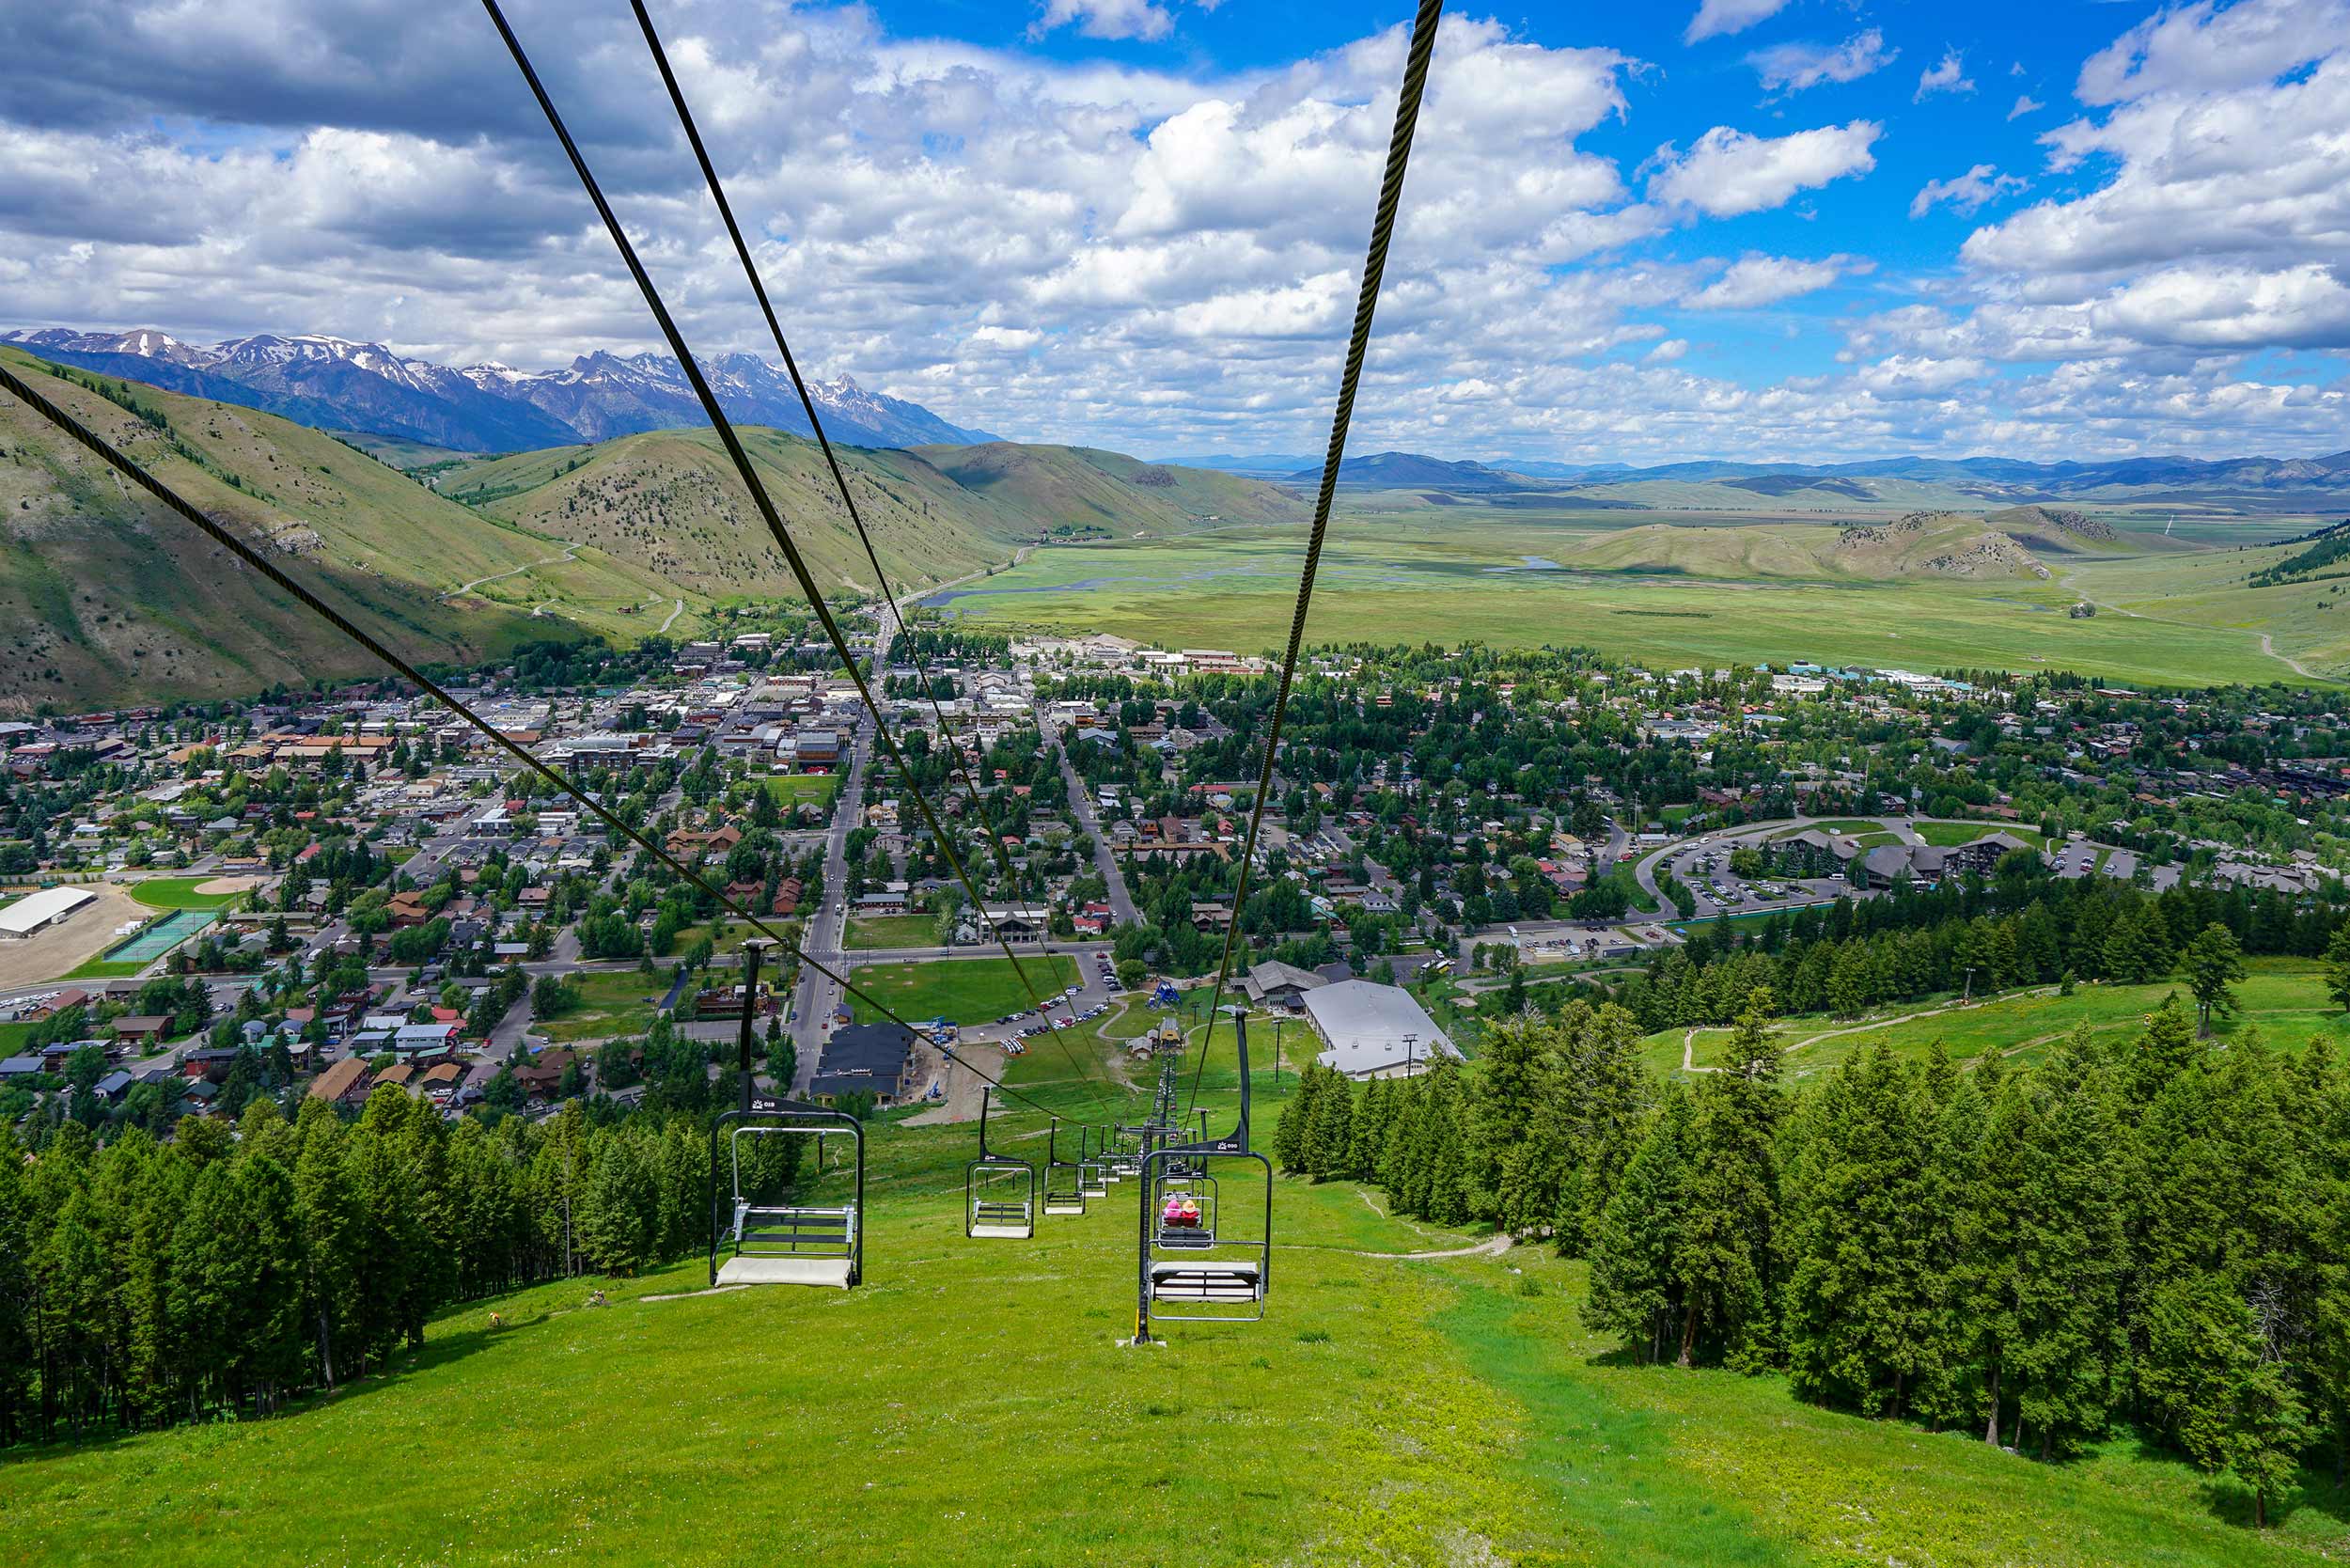 Snow King Mountain Summer Scenic Chairlift